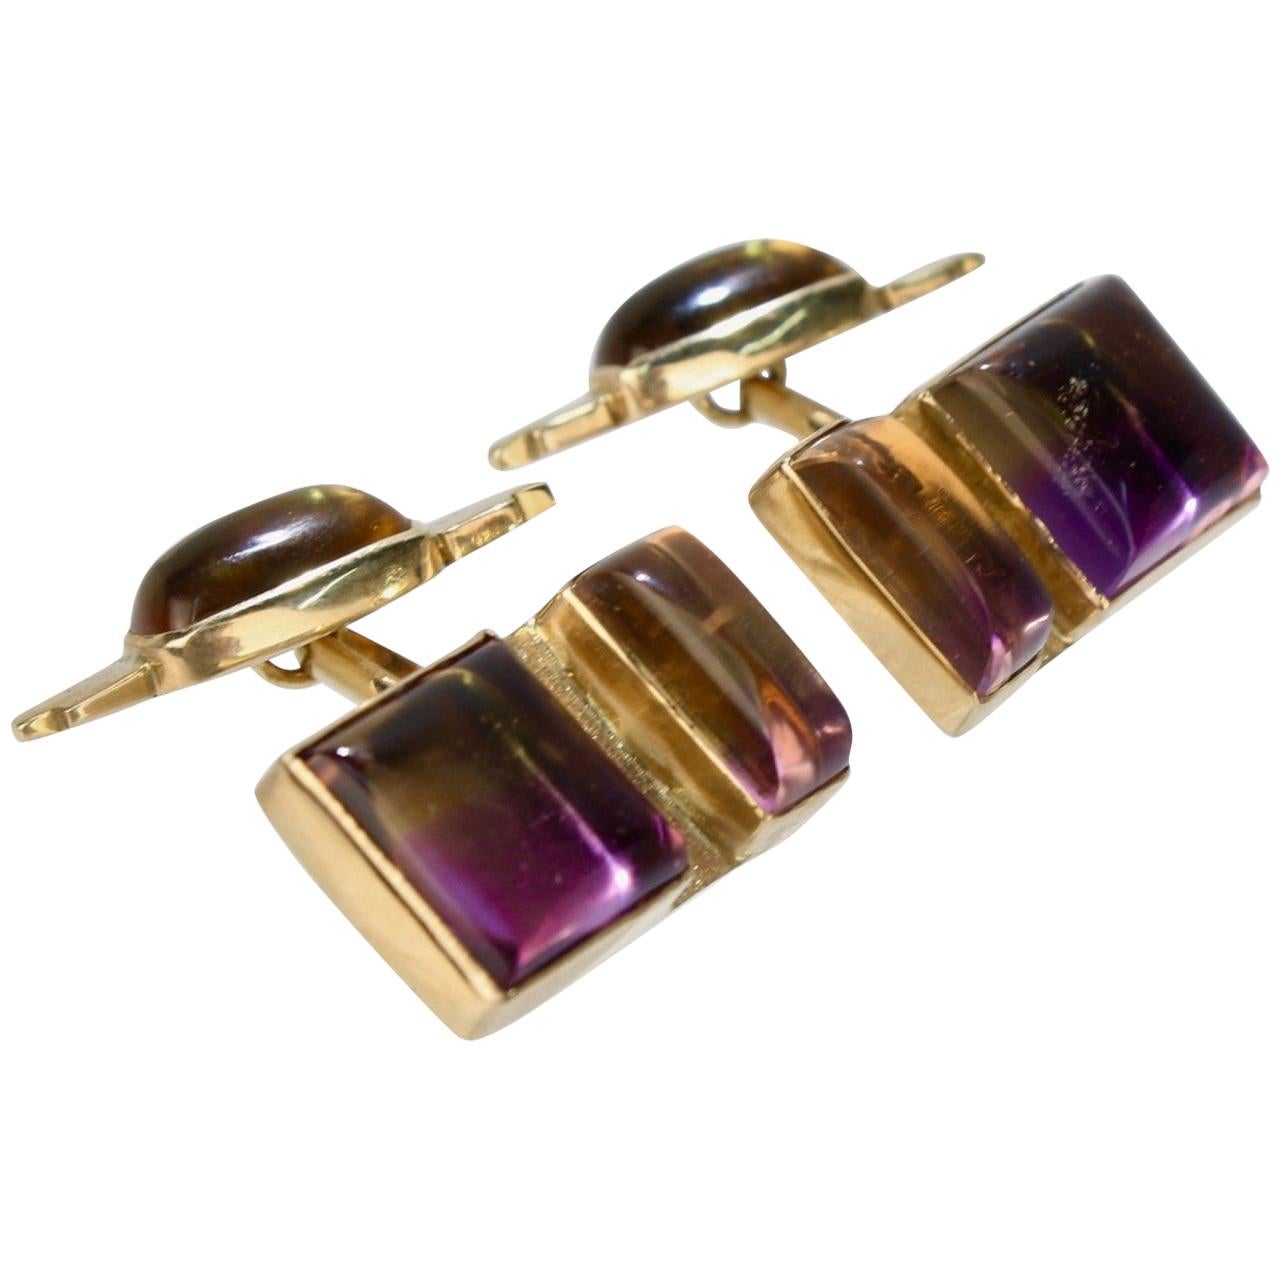 Isabelle Posillico Ametrine and Yellow Gold Cufflinks